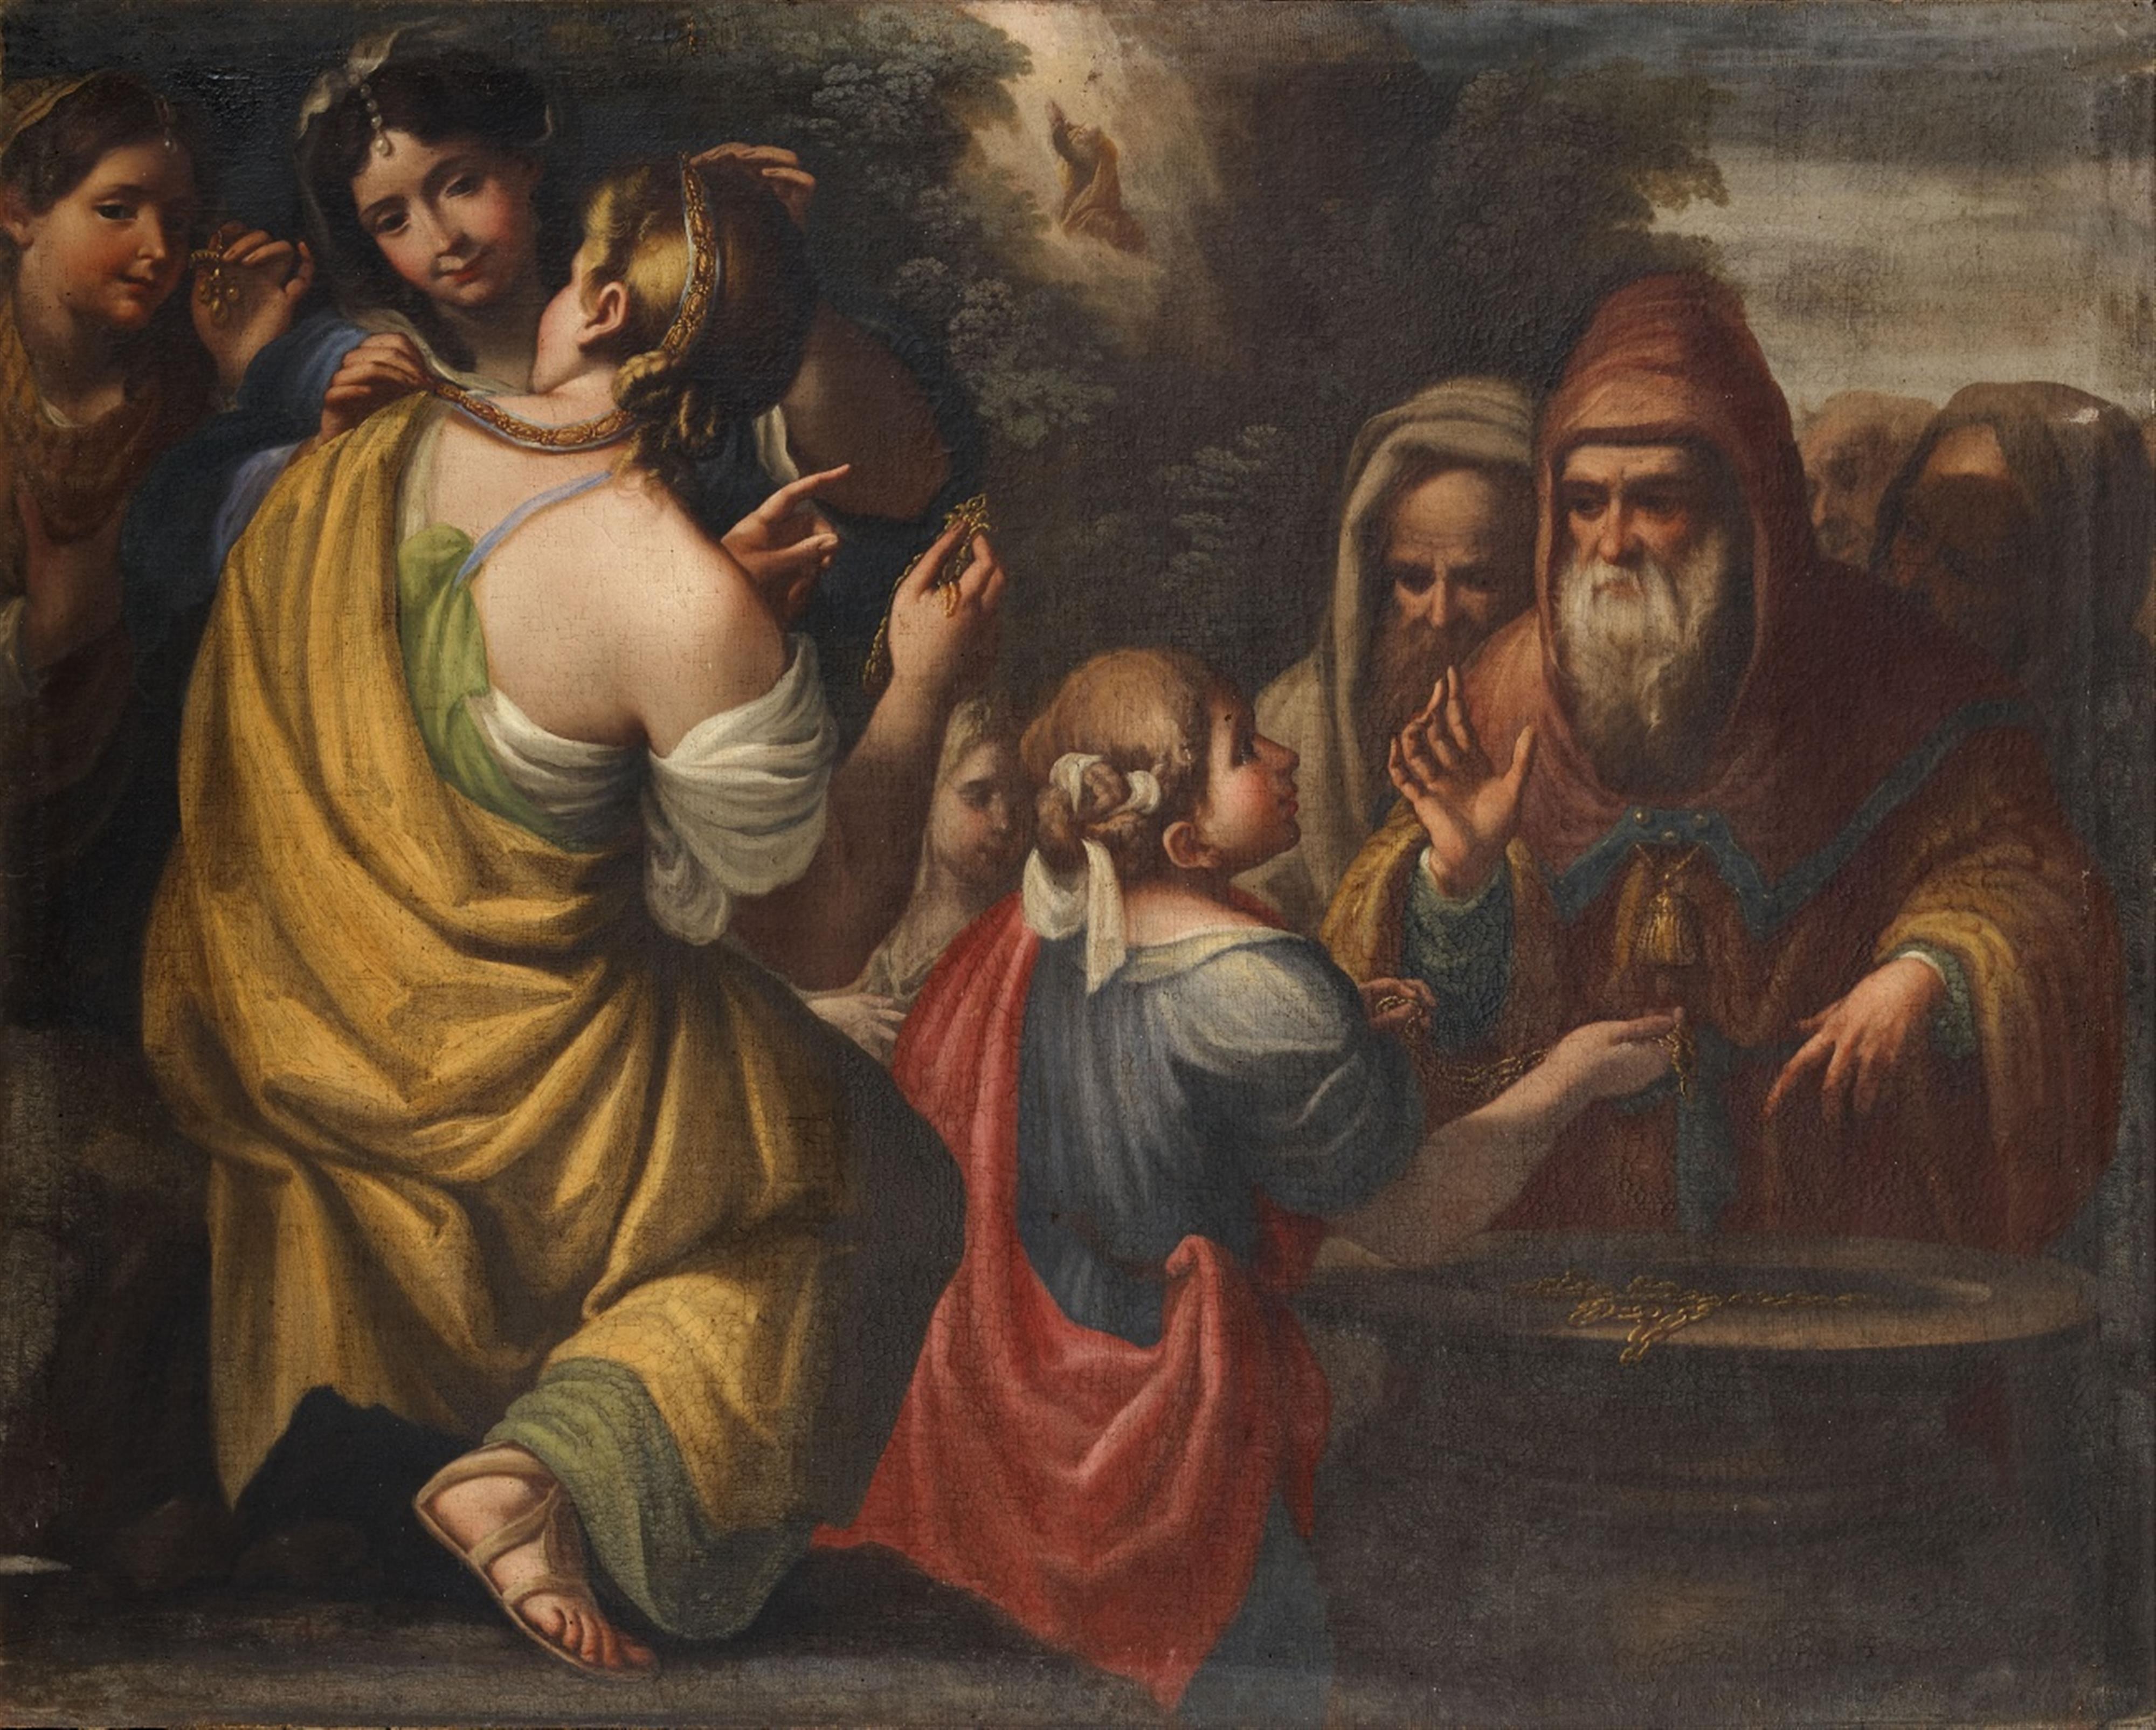 Lombardian School 17th century - The Discovery of the Infant Moses The Test of Fire of Moses The Israelites Collecting their Jewellery Moses Striking the Rock - image-3